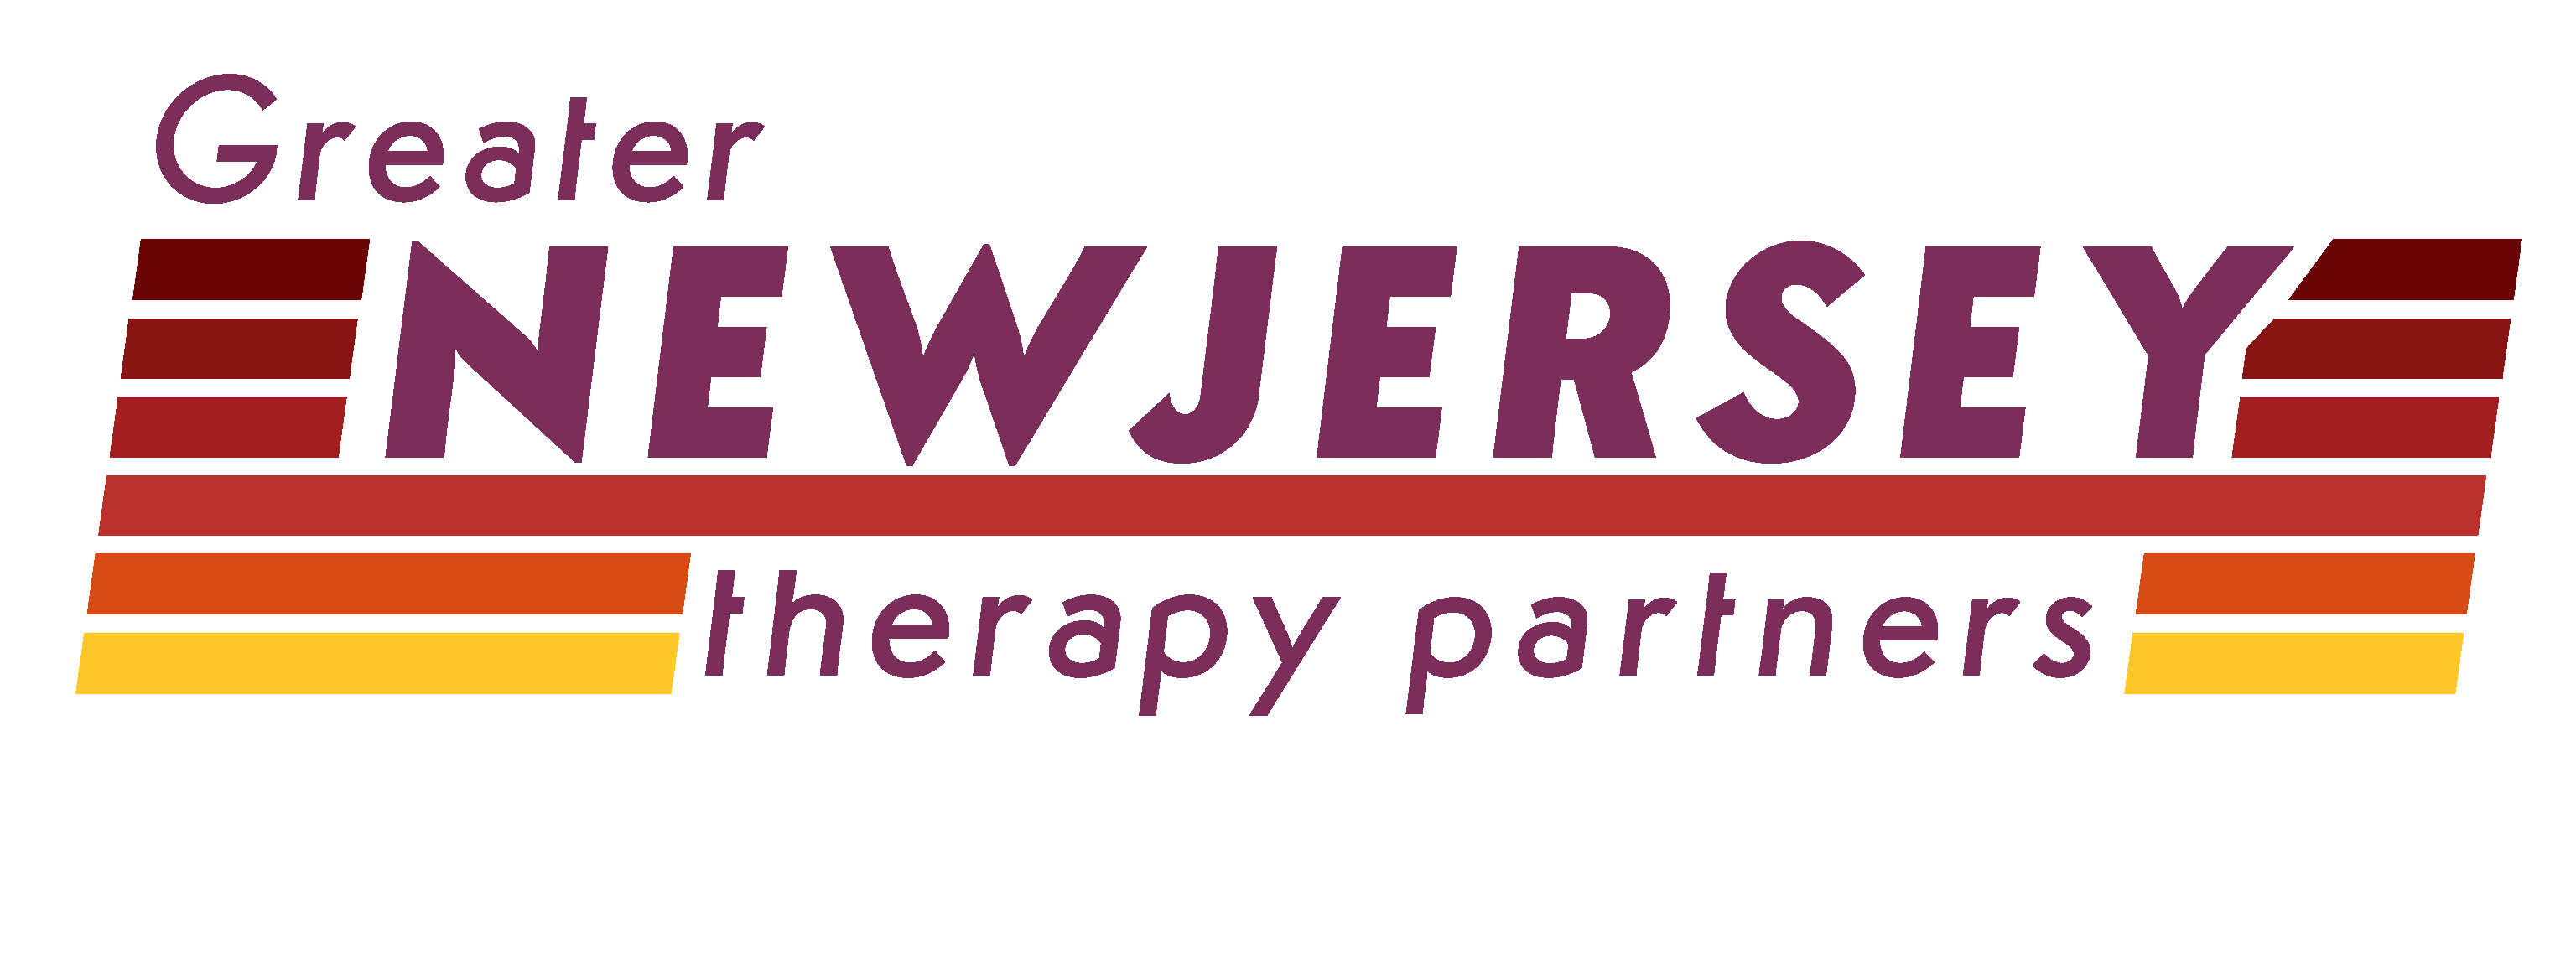 New Jersey Therapy Partners